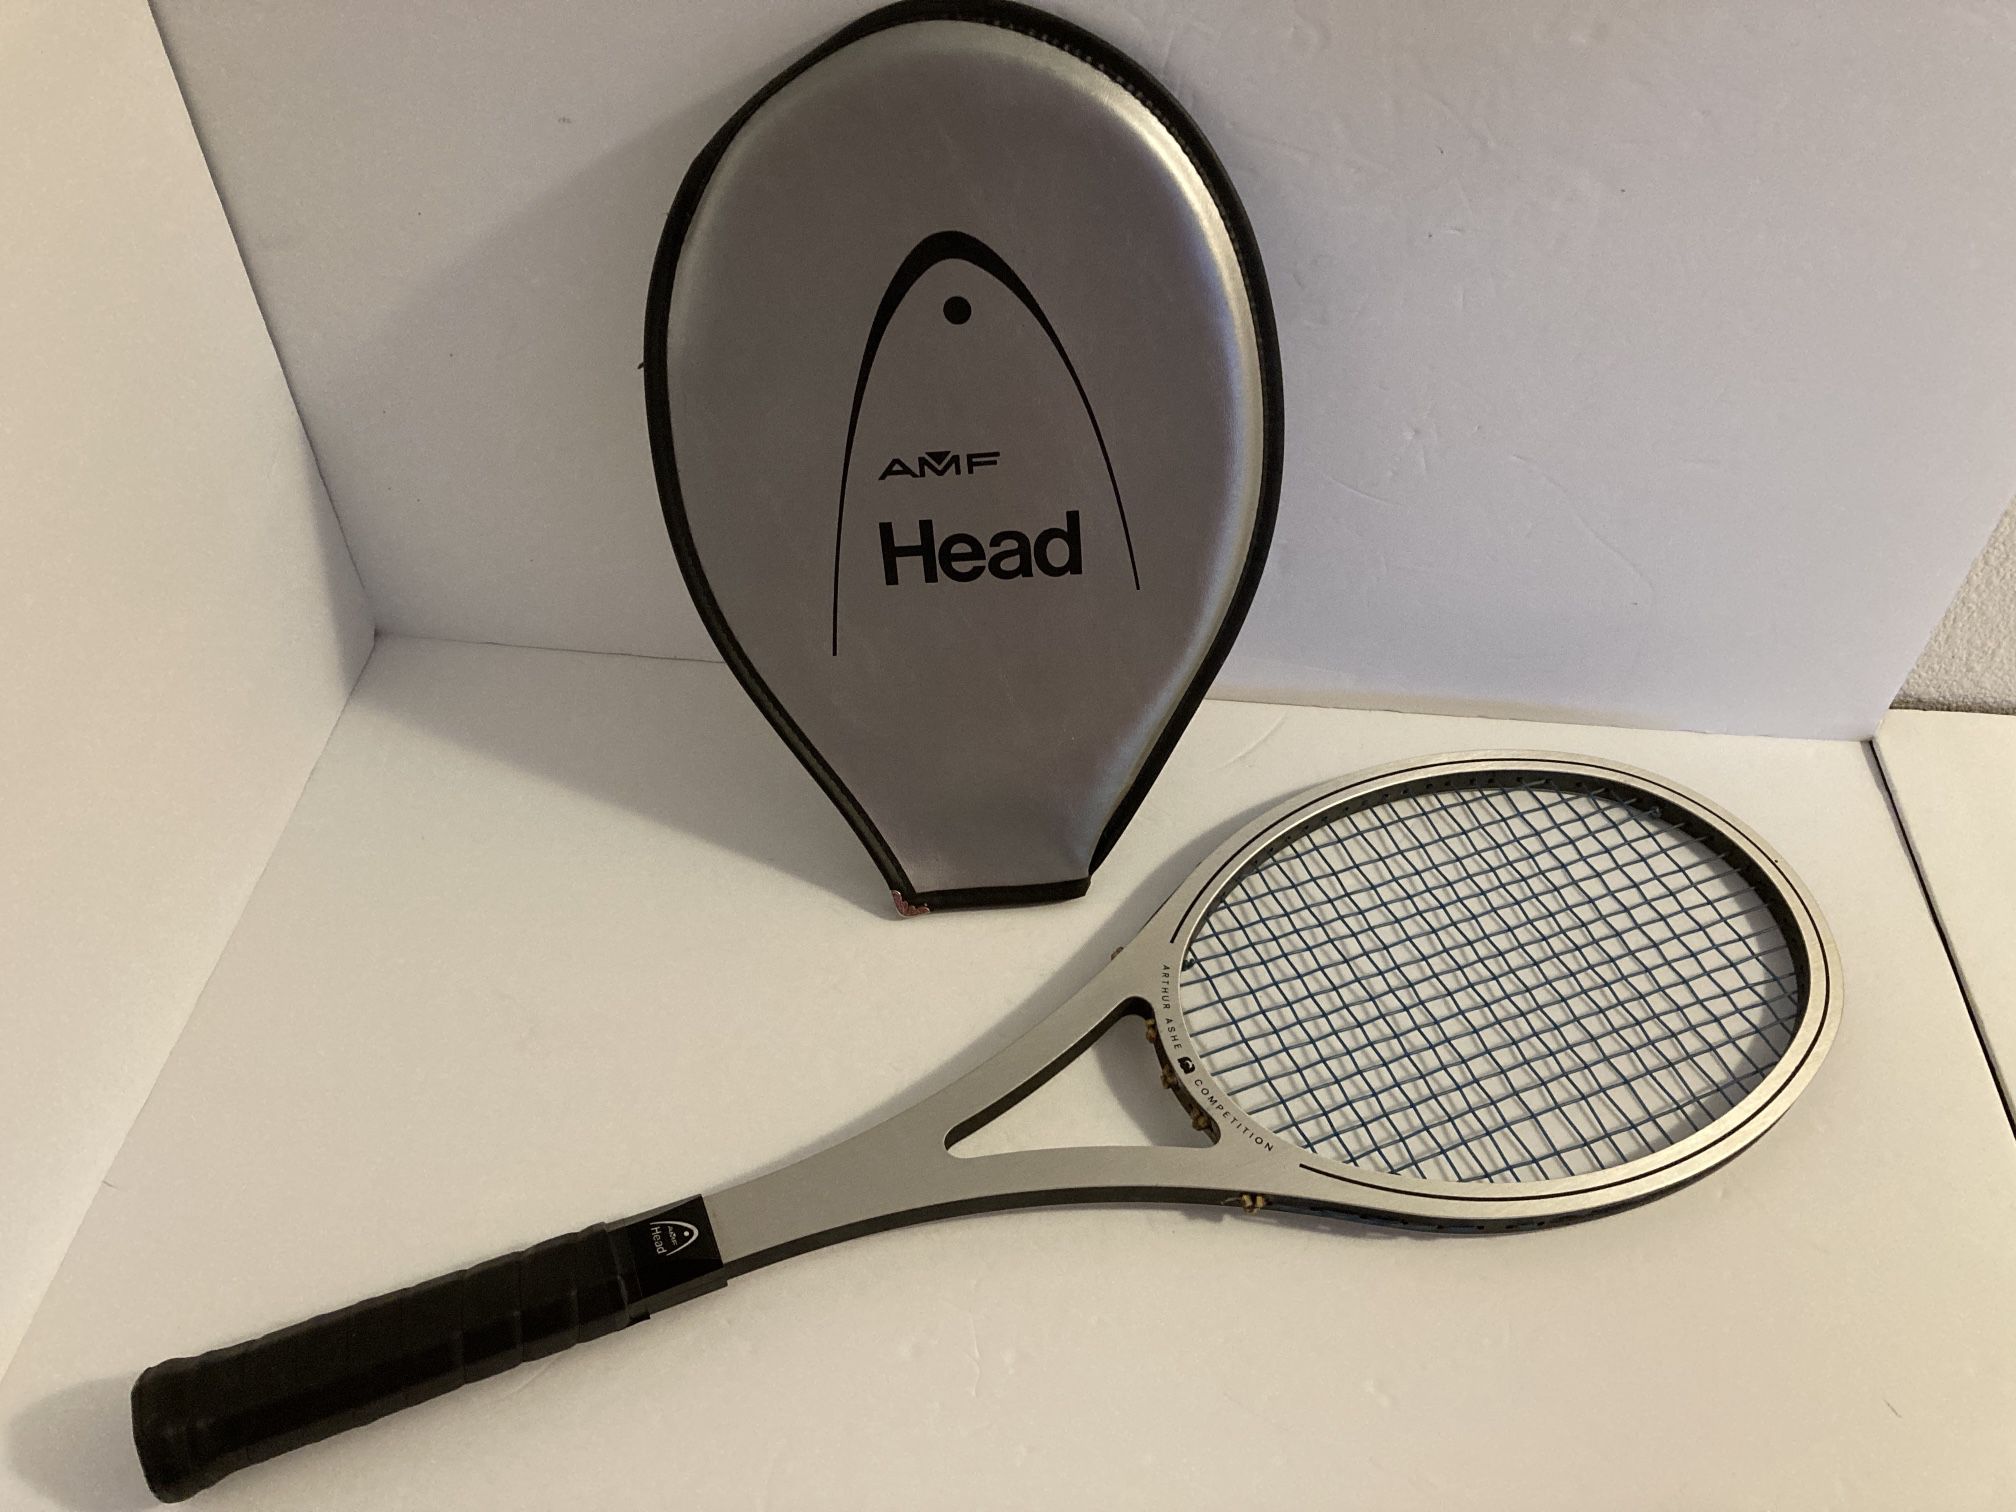 Vintage Tennis Racket Arthur Ashe Competition AMF Head With Cover